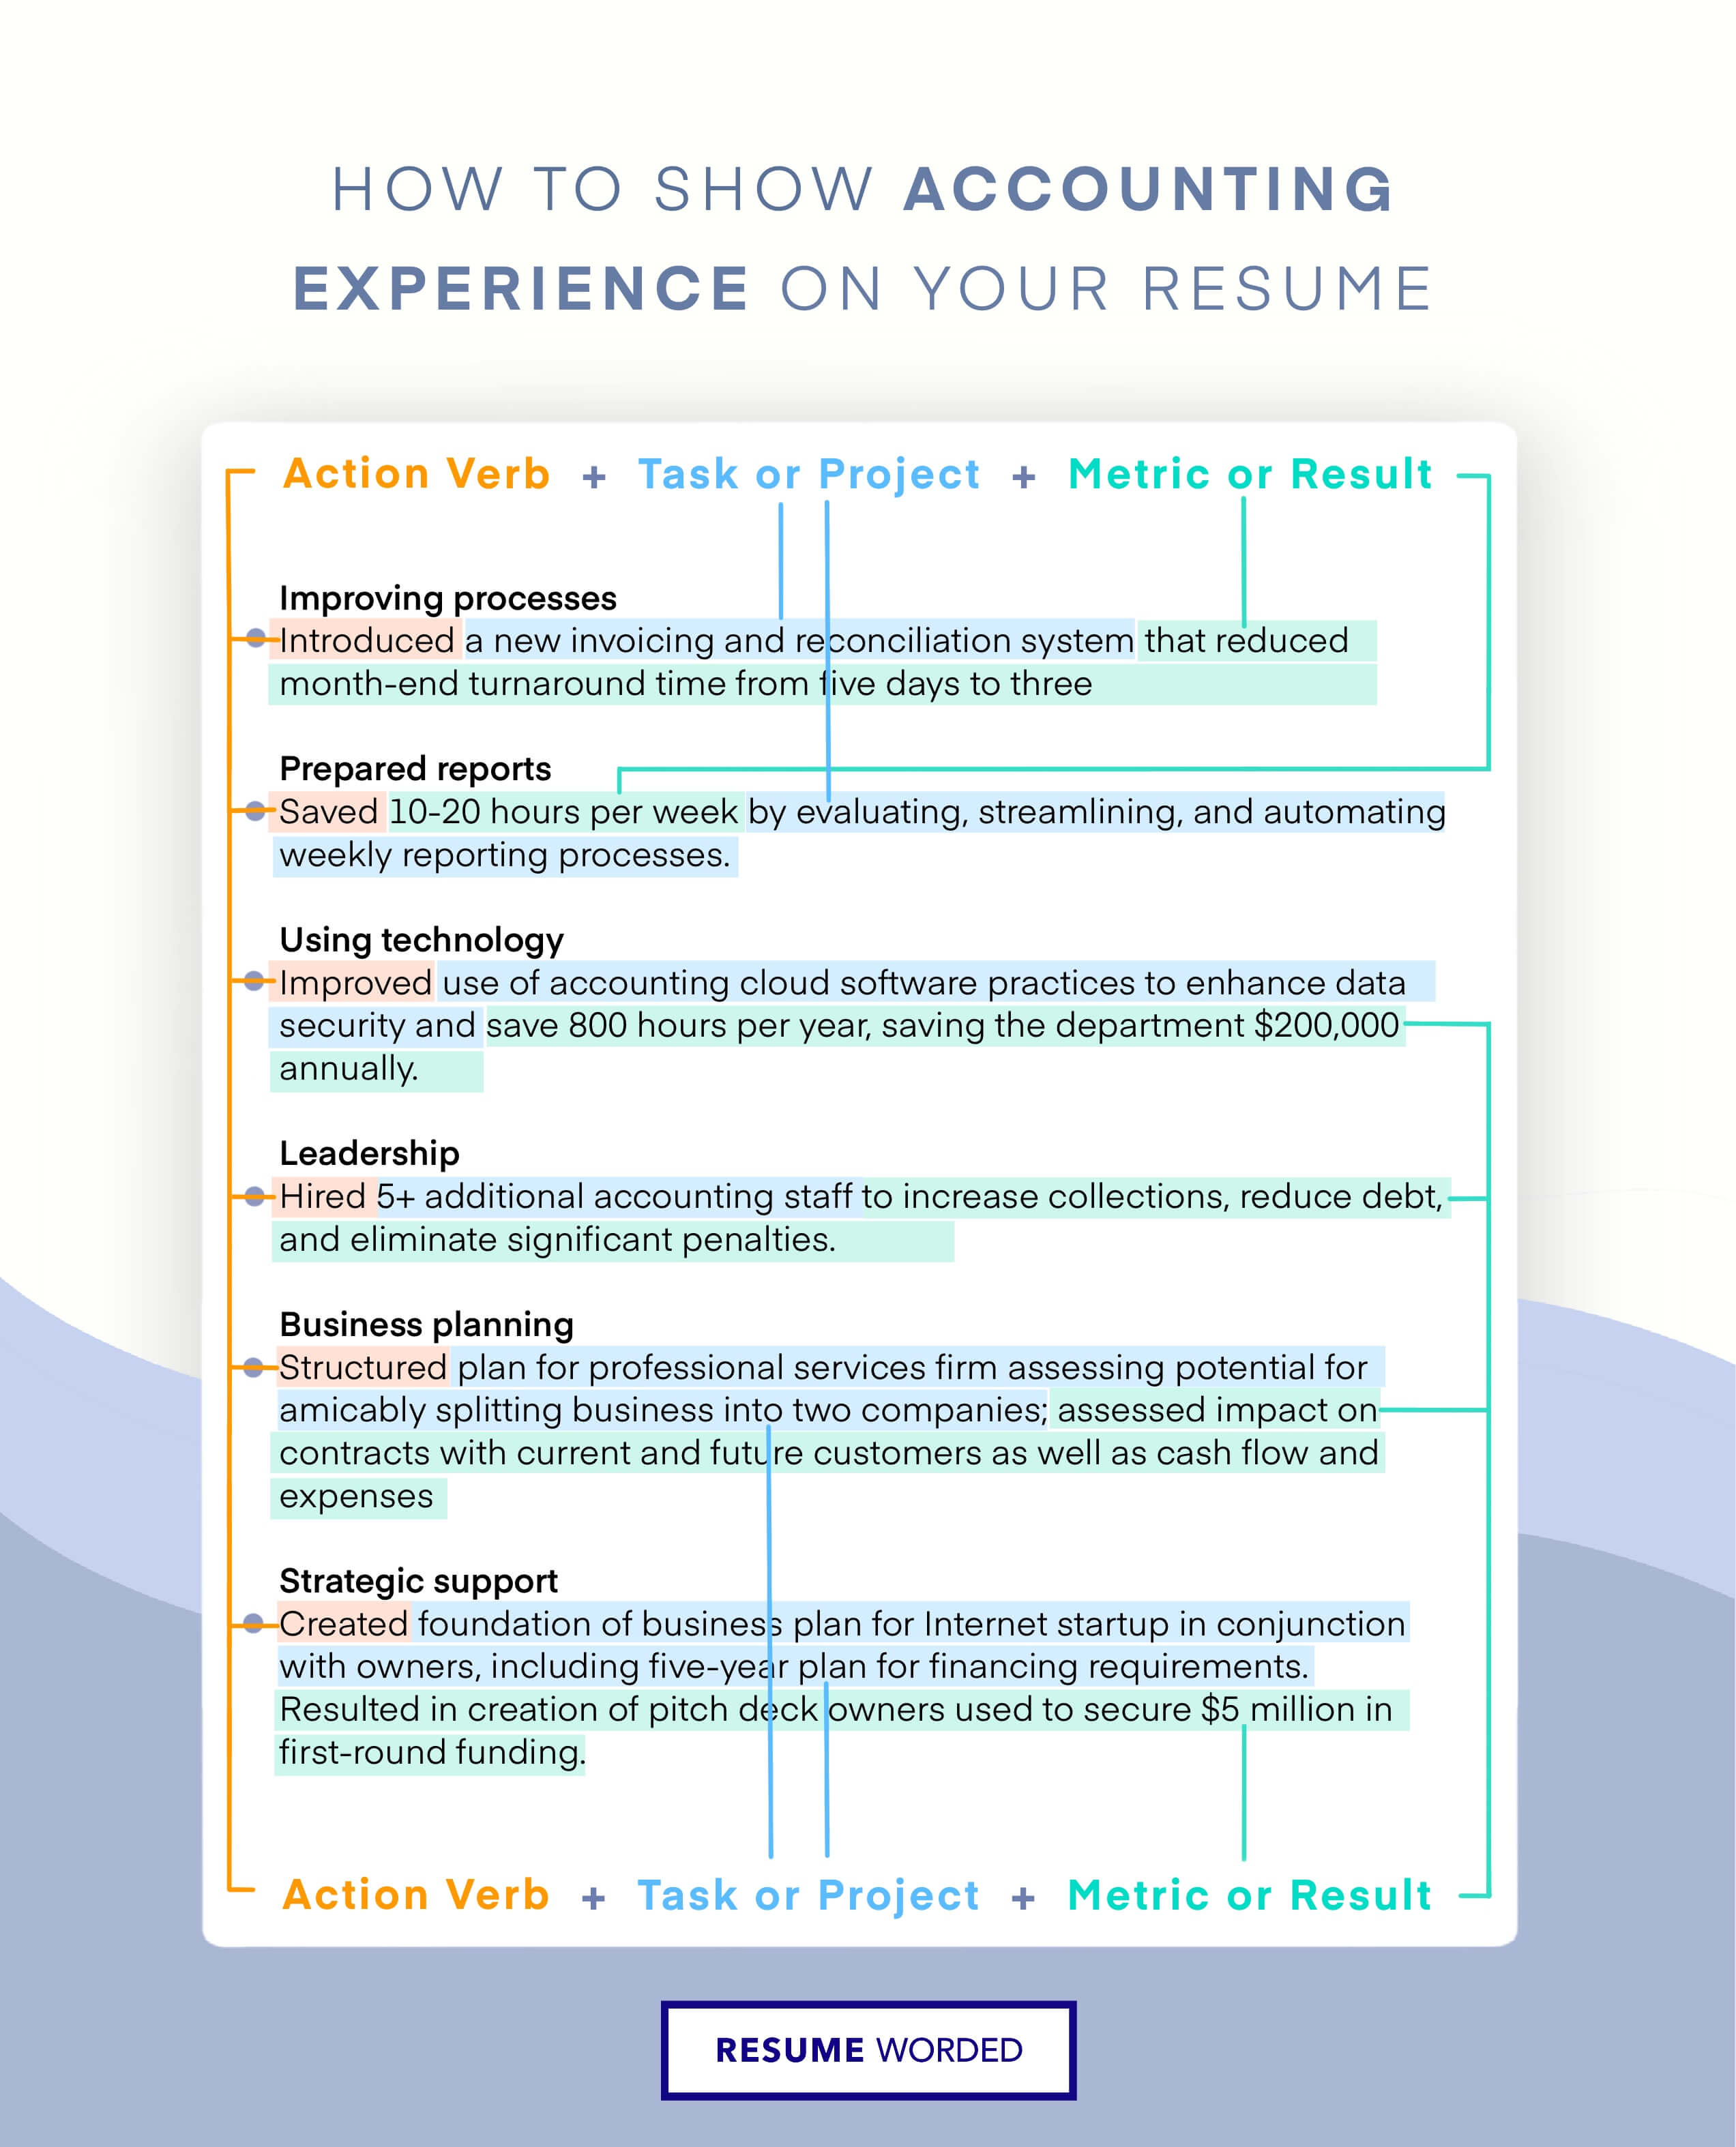 Demonstrate your expertise in the accounting field. - Accounting Manager Resume